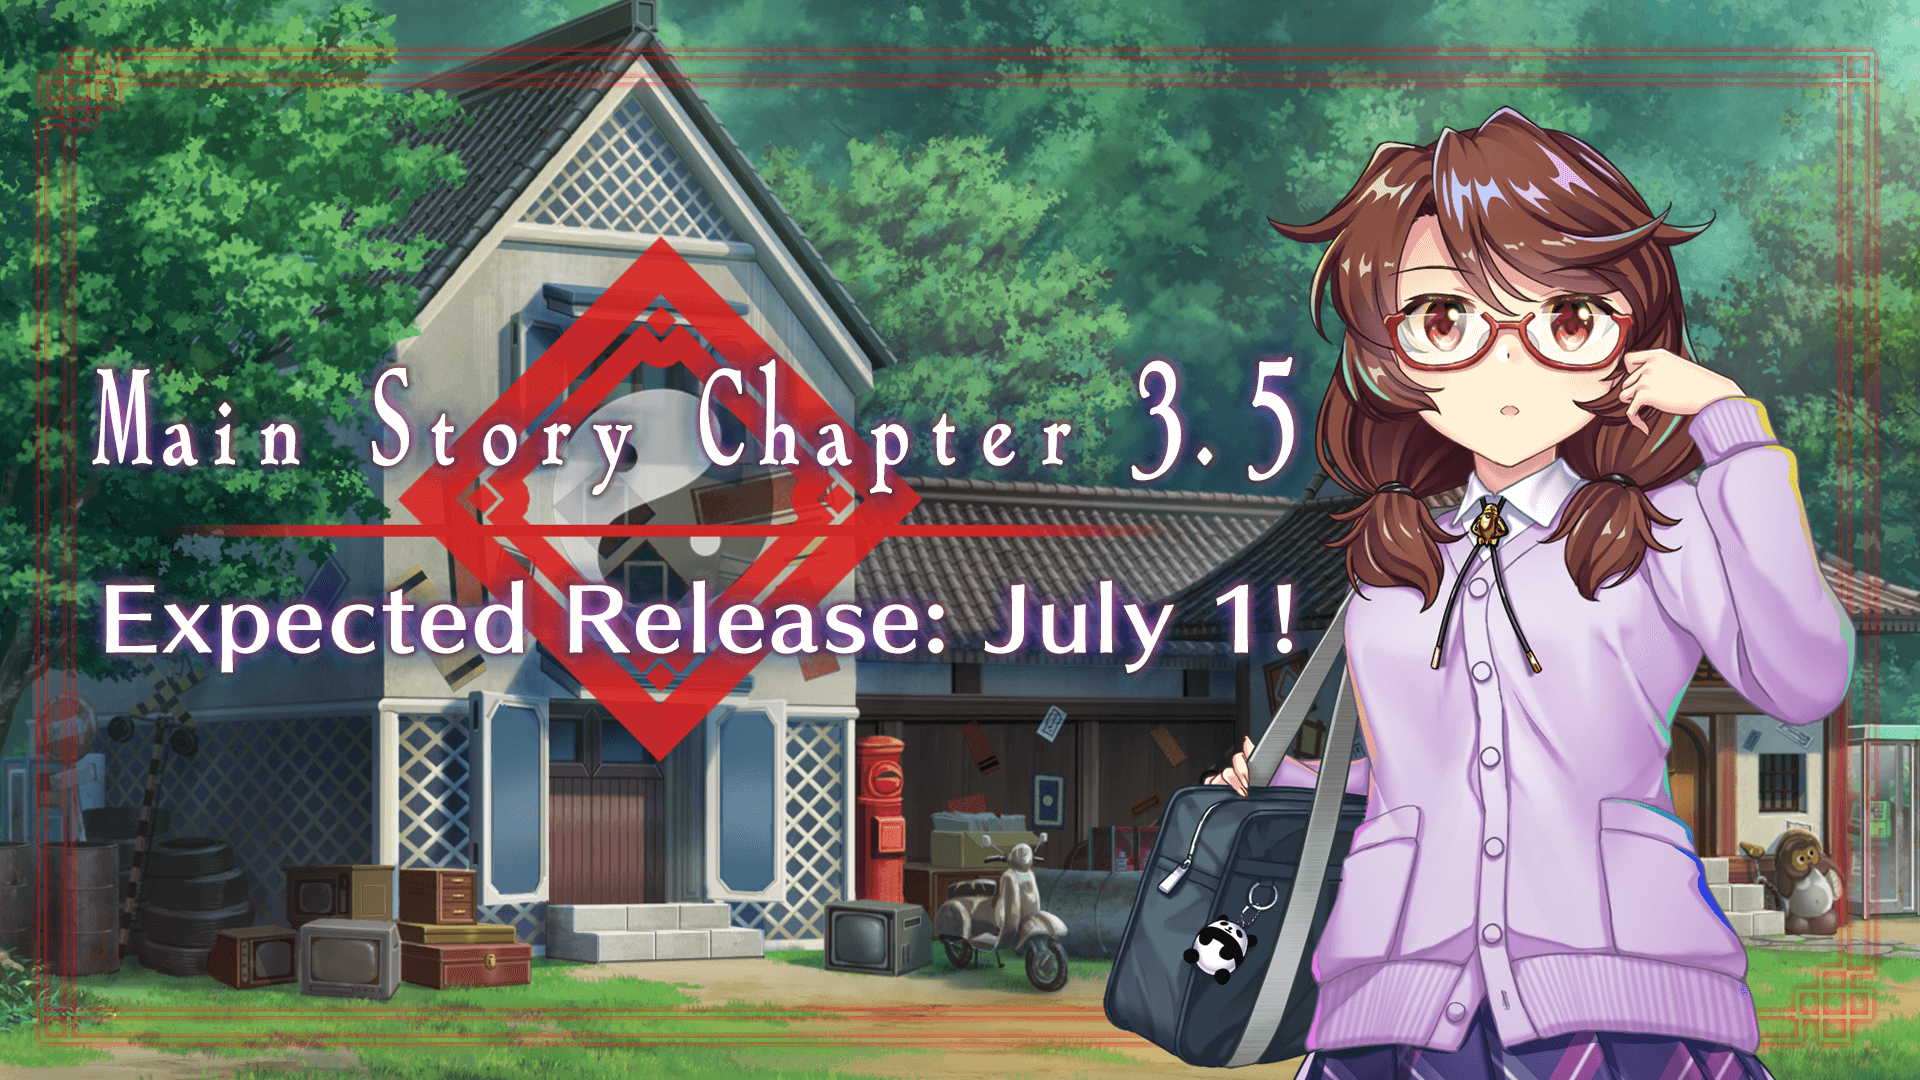 Chapter 3.5